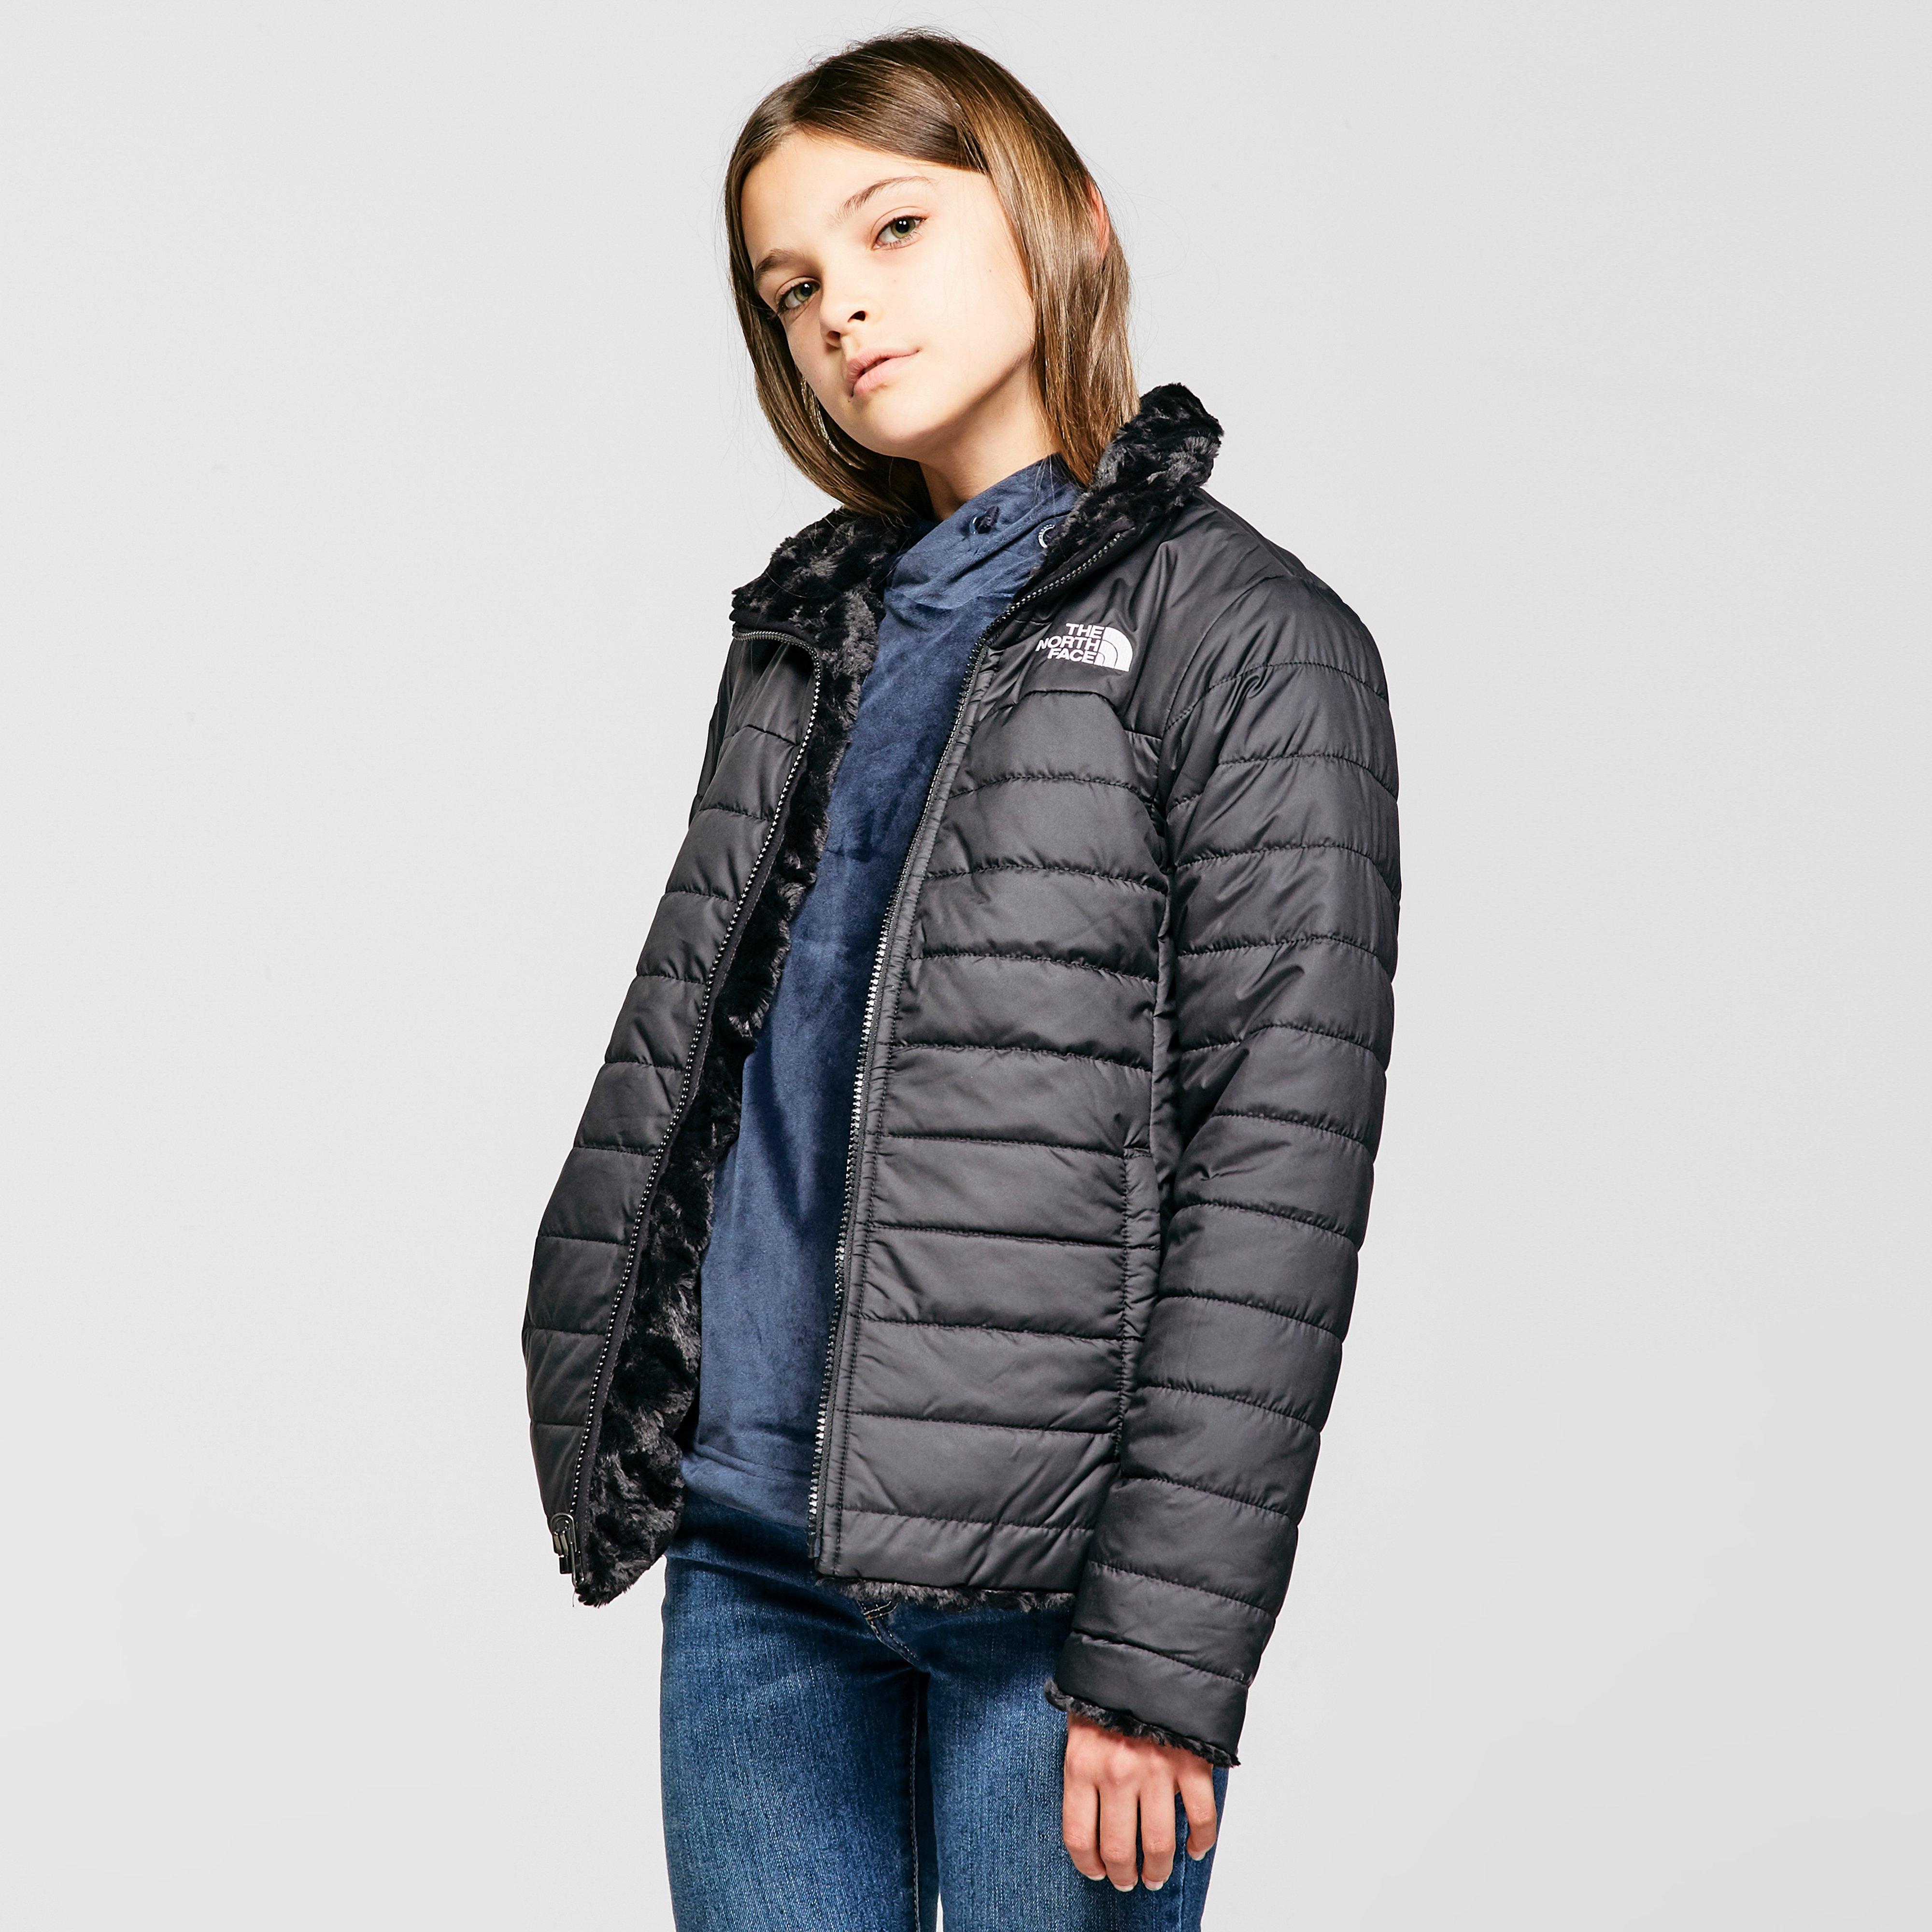 the north face kids reversible mossbud swirl jacket